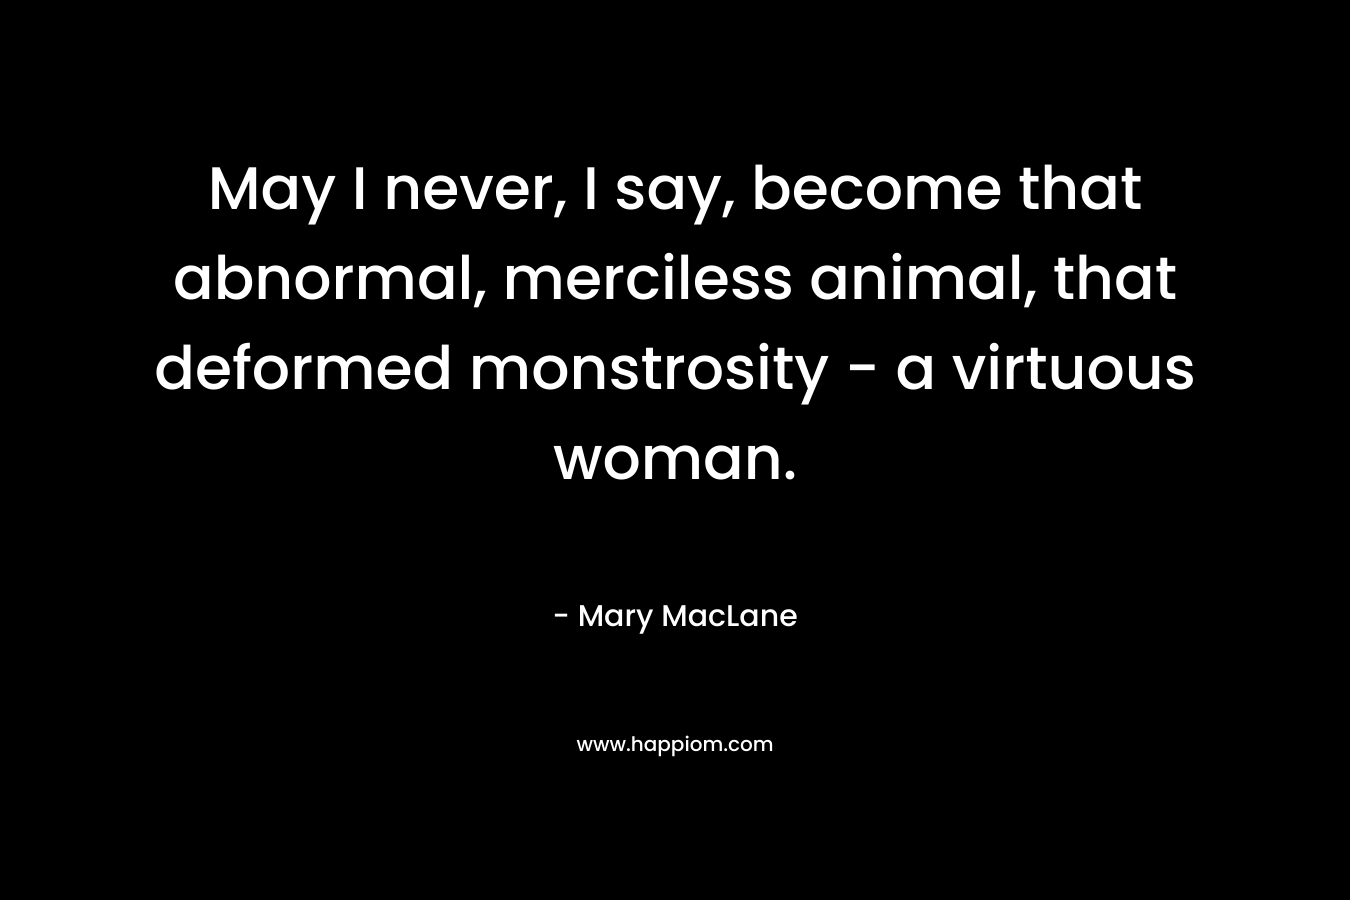 May I never, I say, become that abnormal, merciless animal, that deformed monstrosity – a virtuous woman. – Mary MacLane